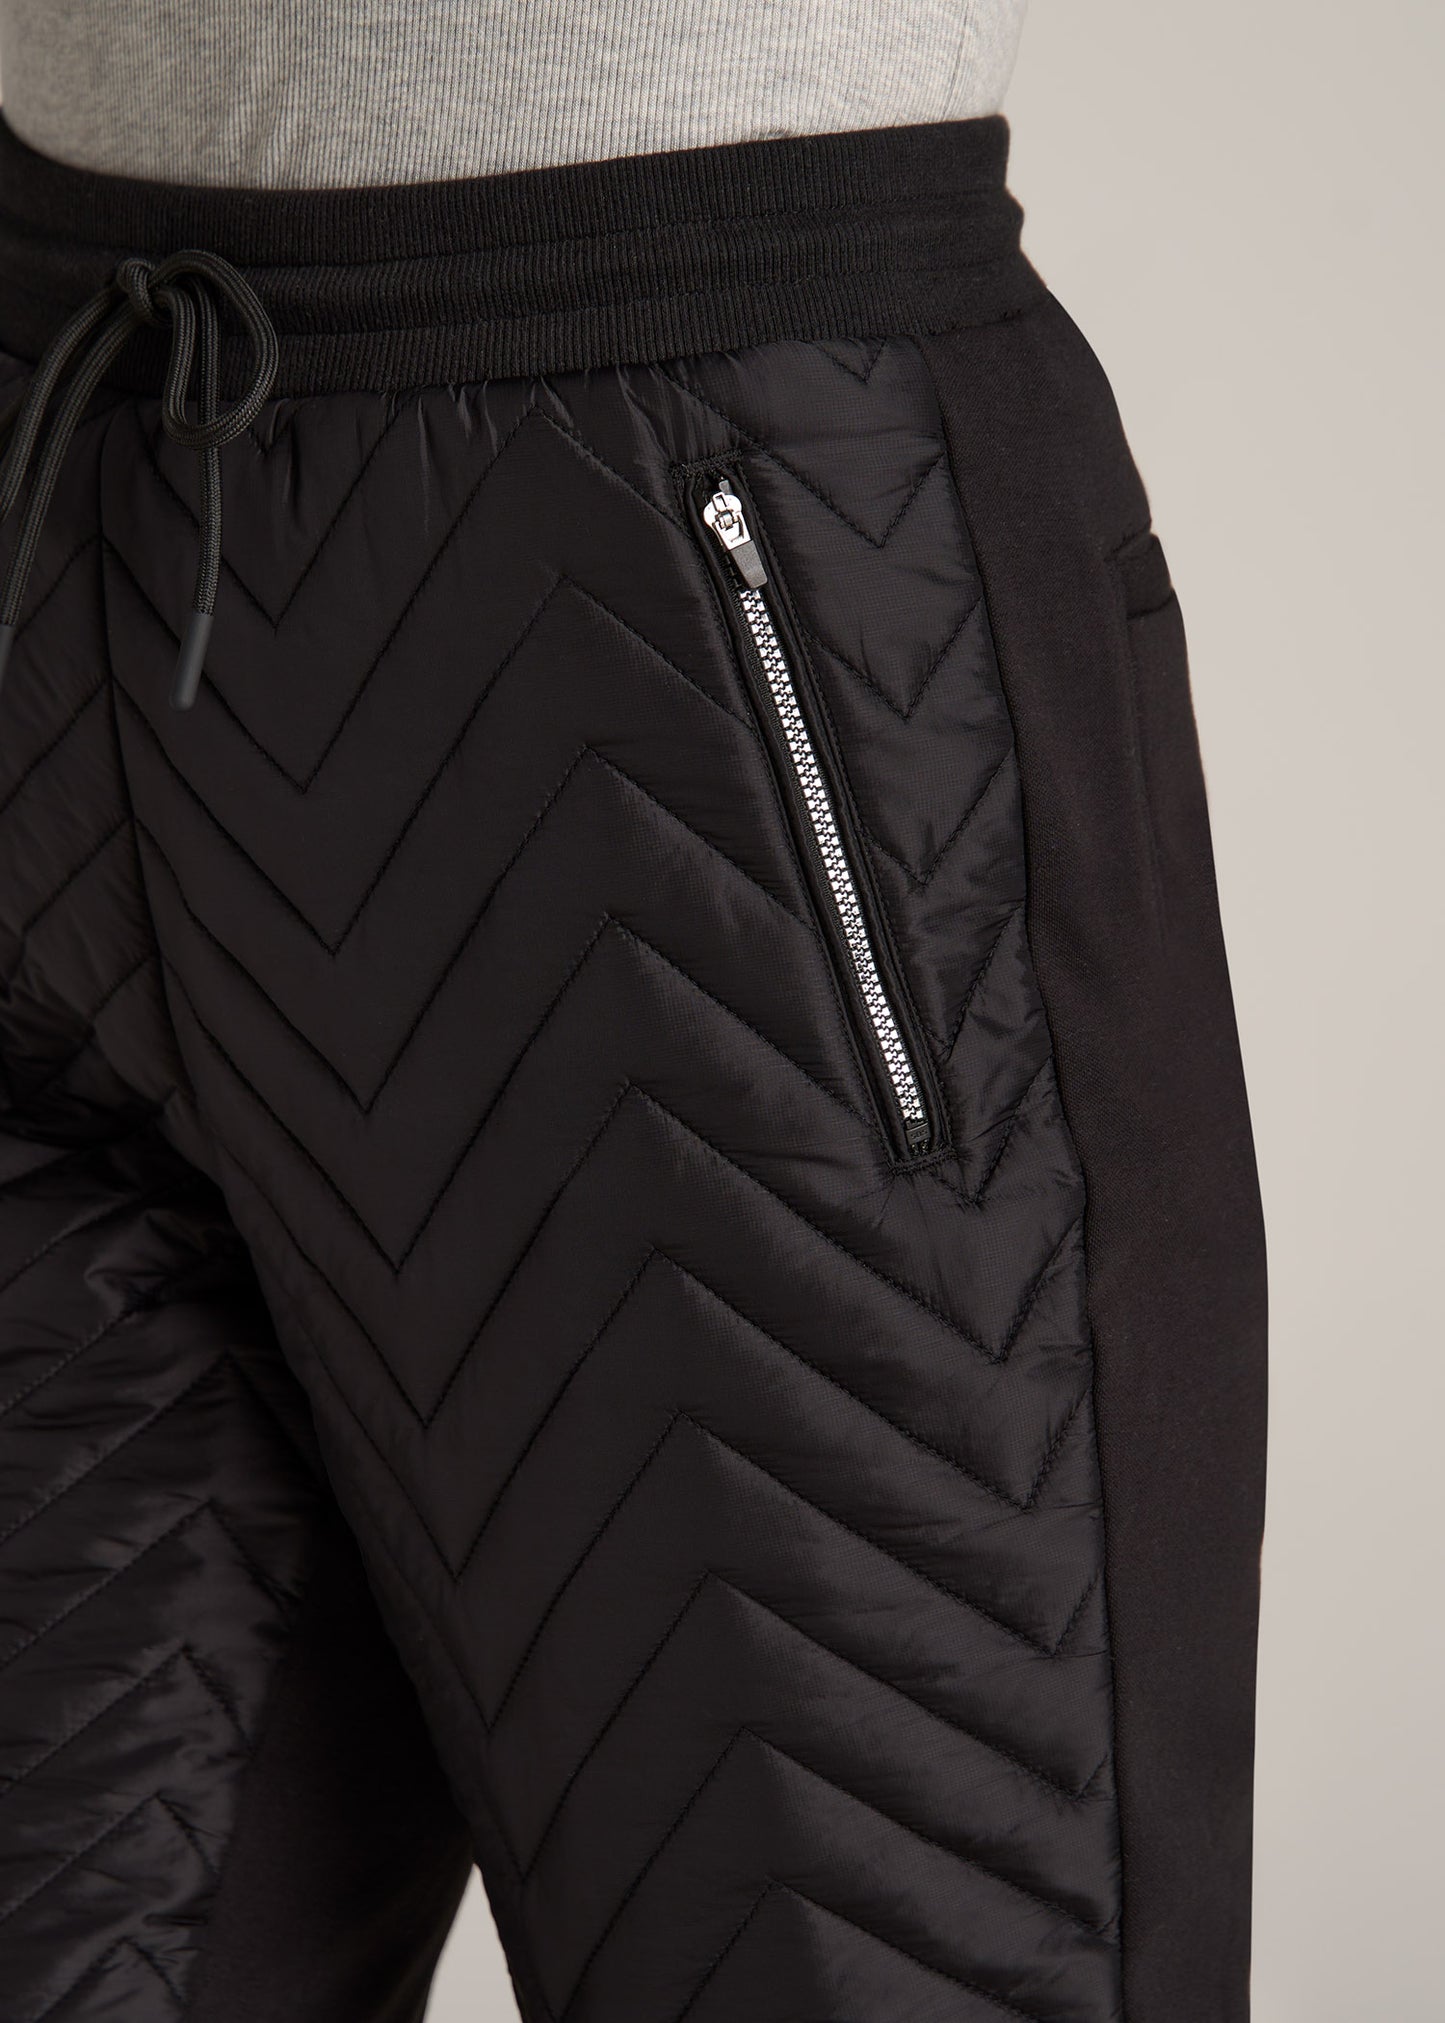 Quilted Extra-Long Joggers for Tall Women in Black